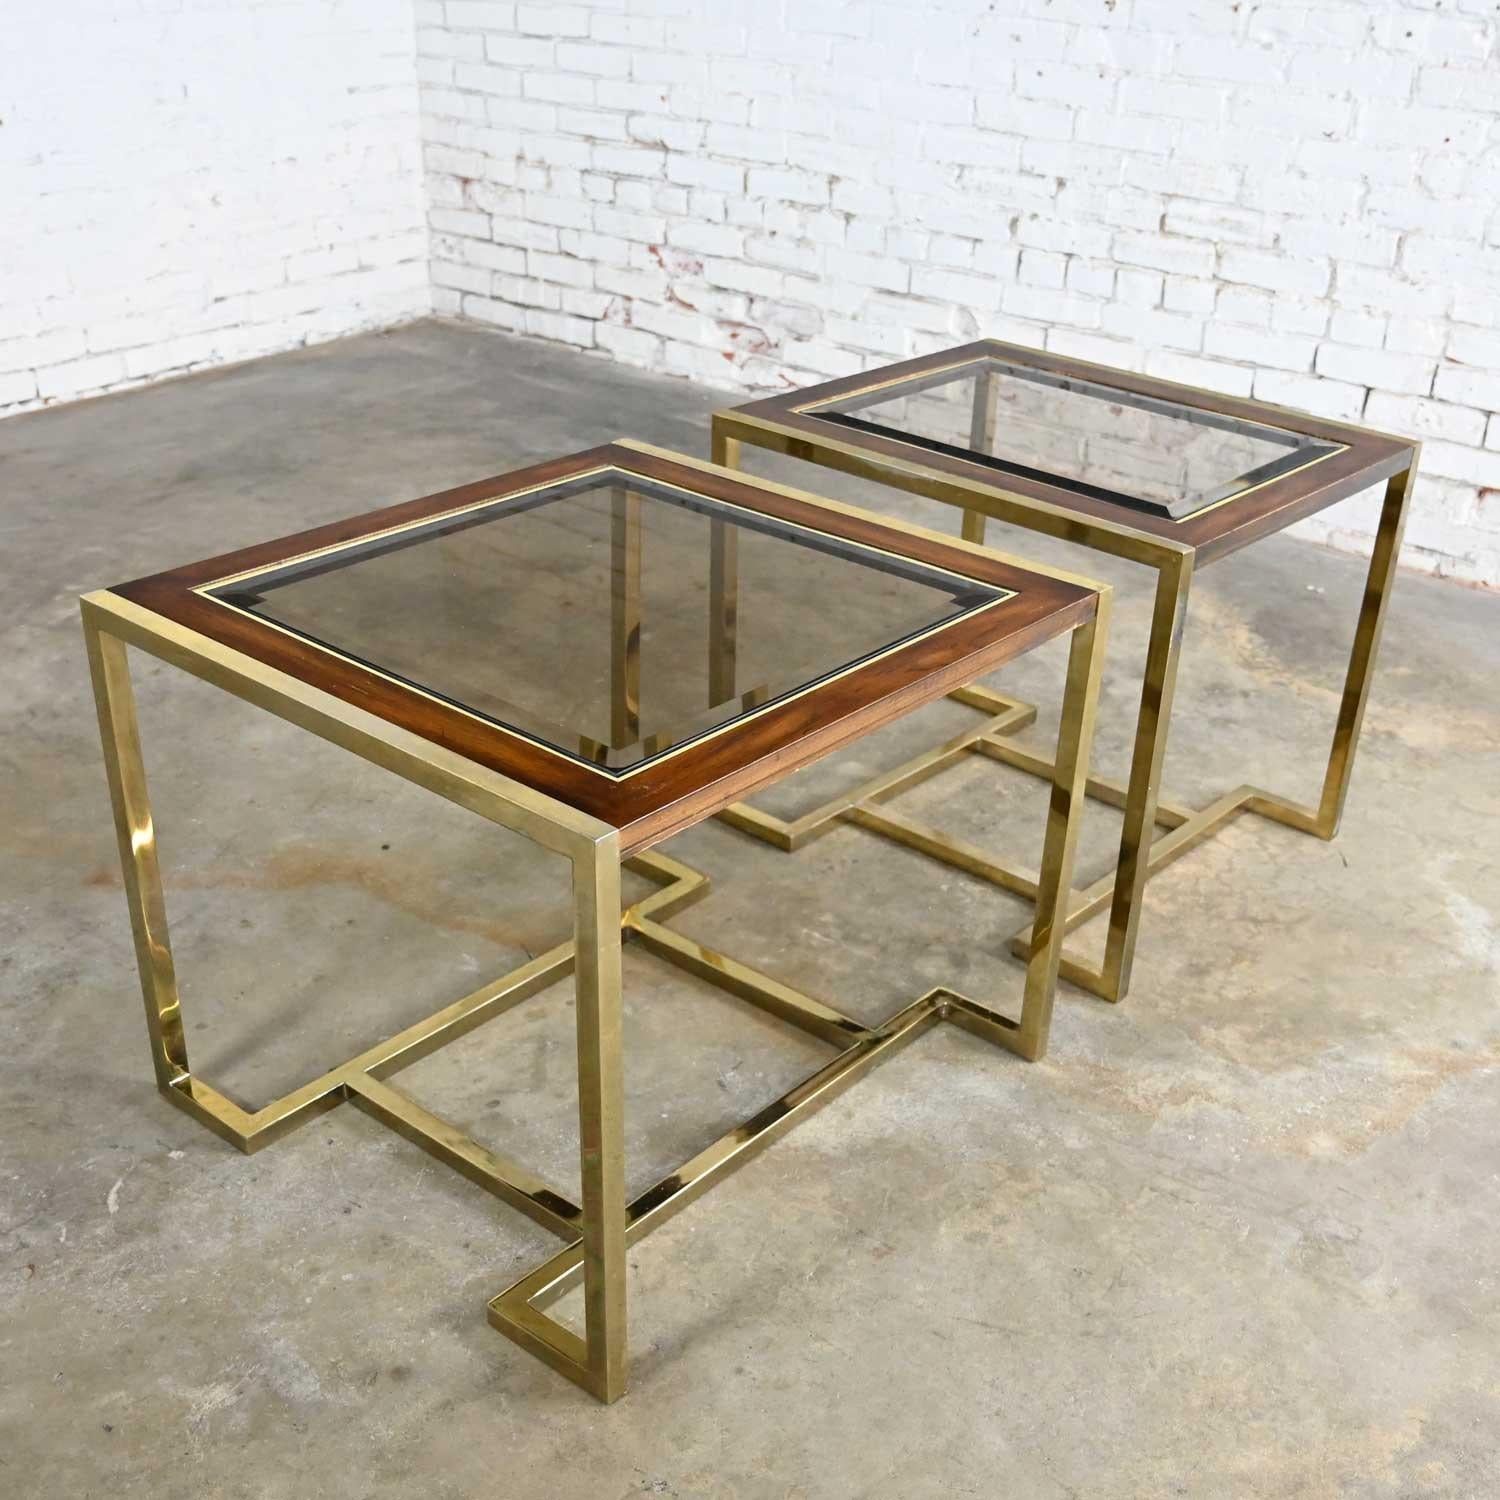 2 Brass Plated Wood & Glass End Tables by Thomasville Furn Style Milo Baughman For Sale 4